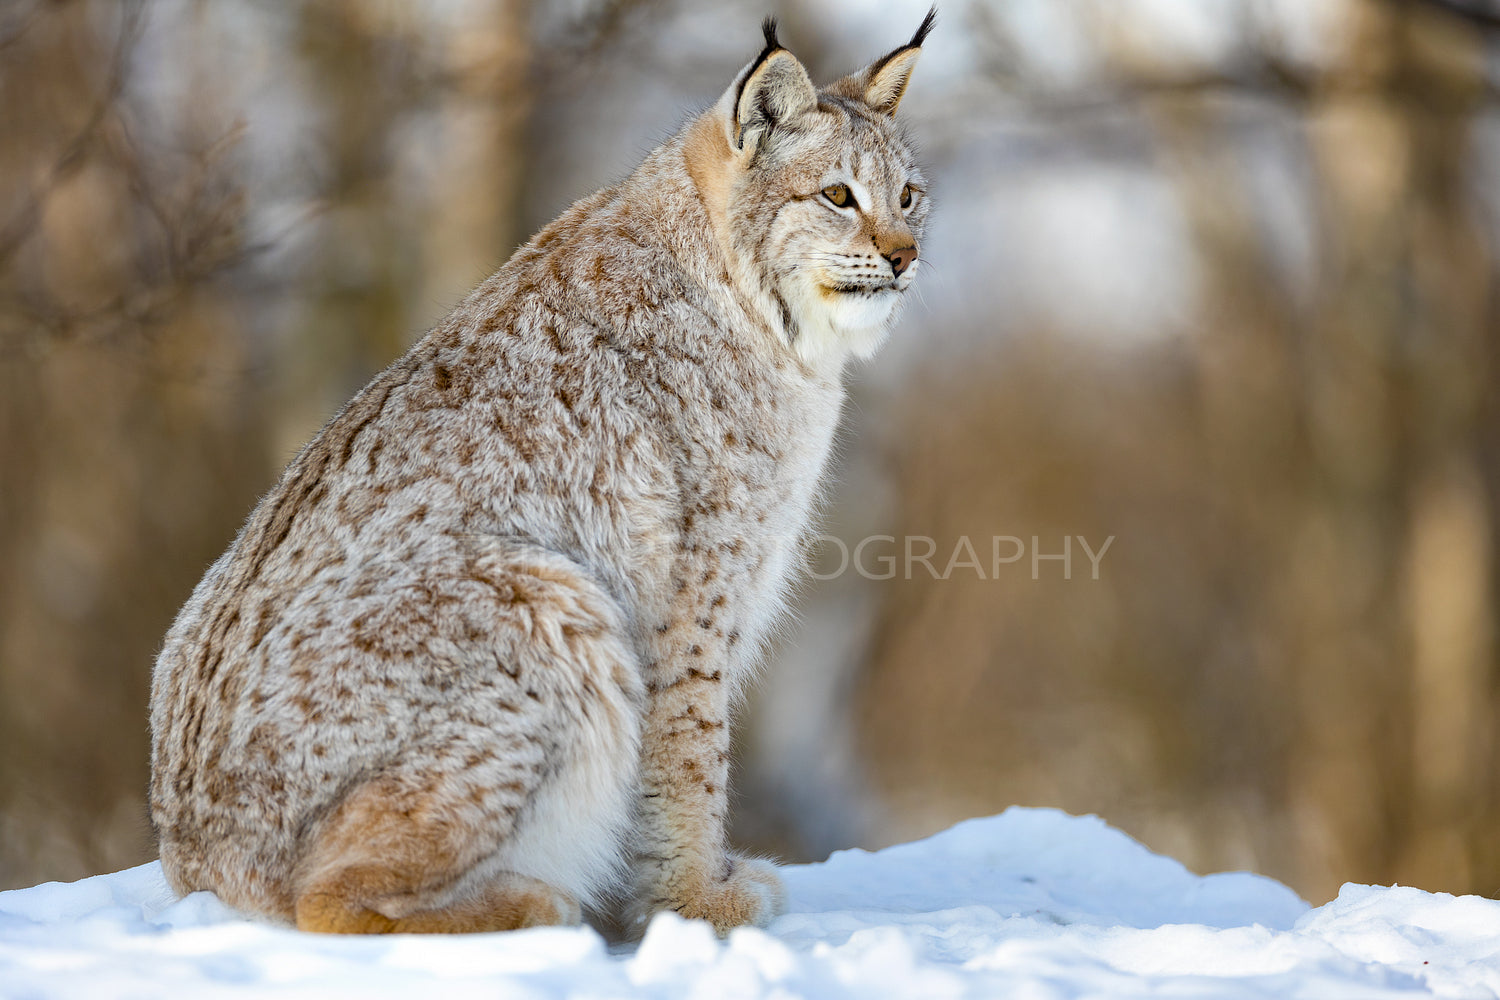 Furry Eurasian wild cat looking away while sitting on snow